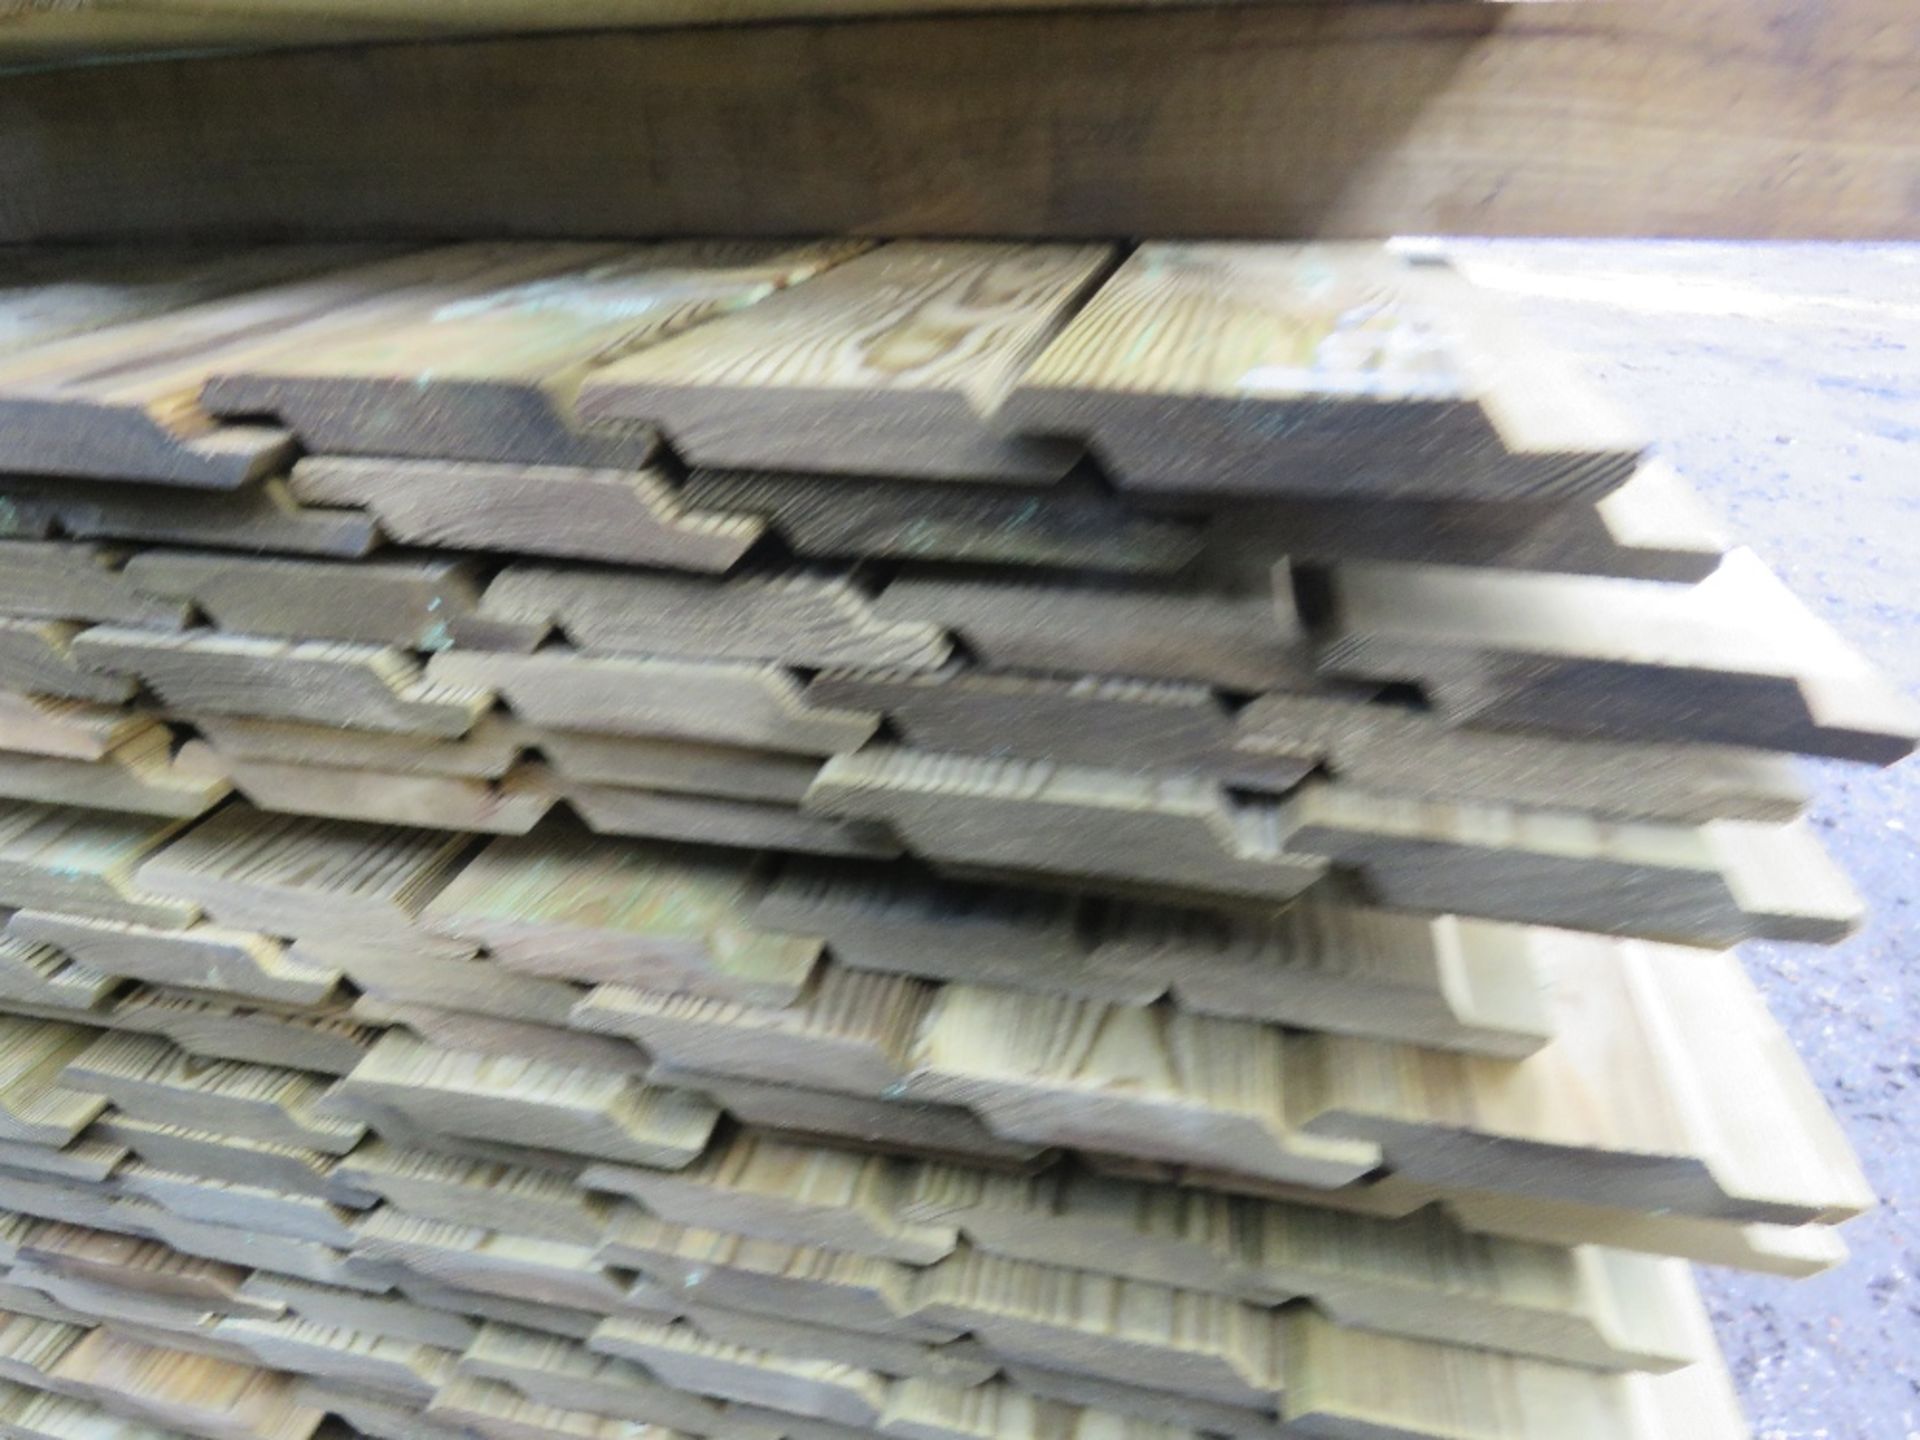 LARGE BUNDLE OF PRESSURE TREATED SHIPLAP TIMBER CLADDING: 1.72M LENGTH X 10CM WIDTH APPROX. - Image 3 of 3